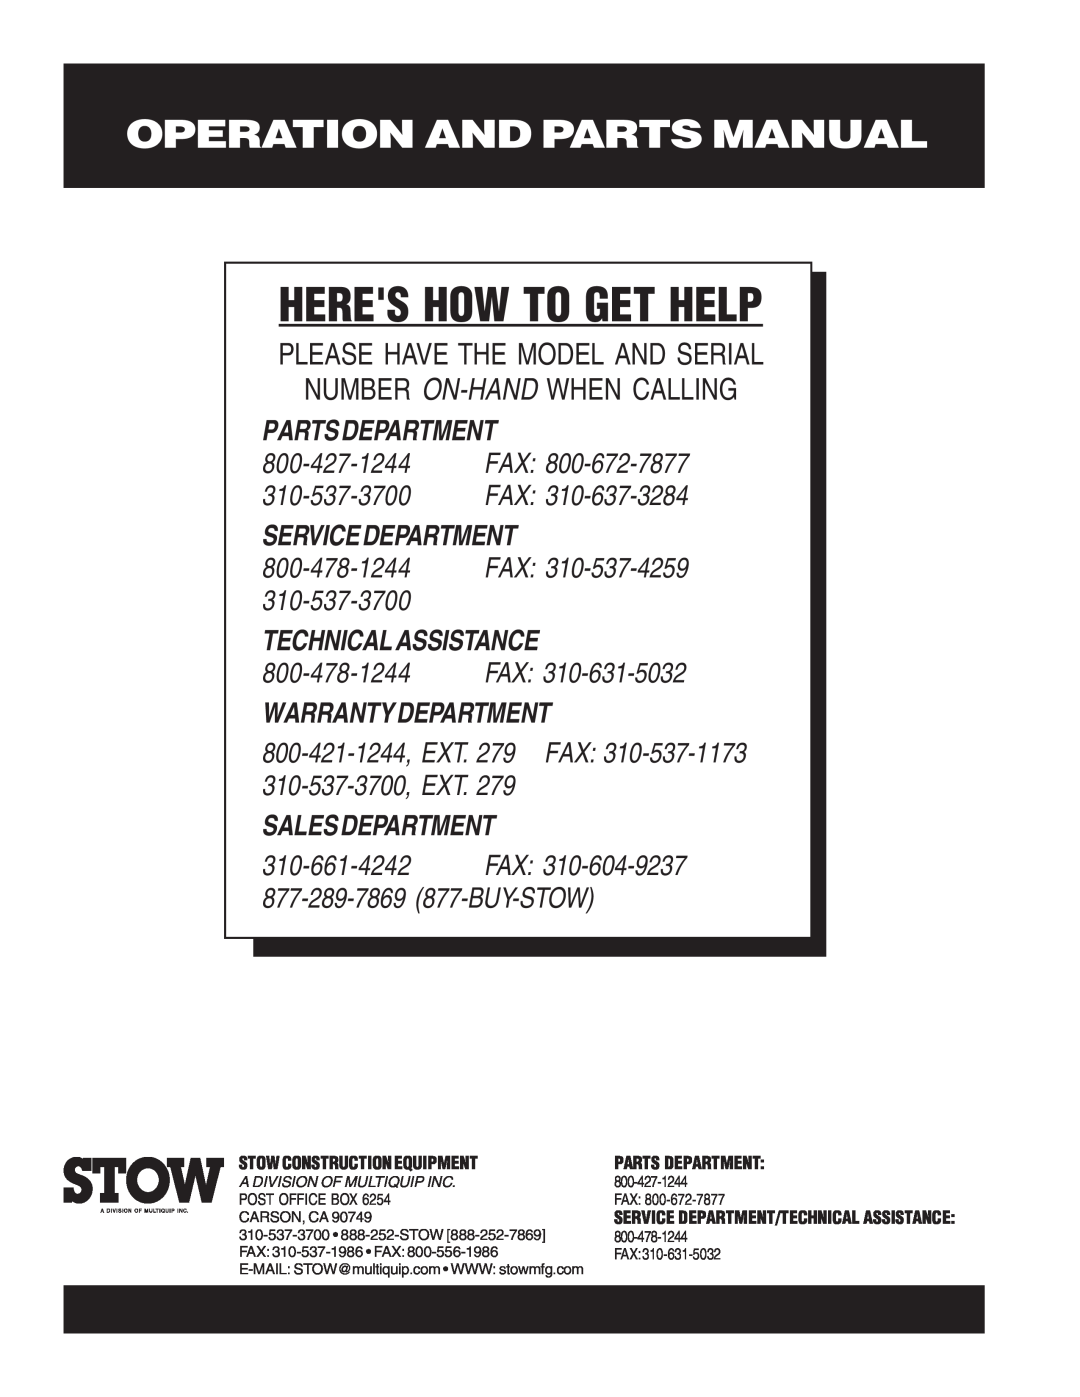 Stow SHS62A Operation And Parts Manual, Heres How To Get Help, Partsdepartment, Servicedepartment, Warrantydepartment 